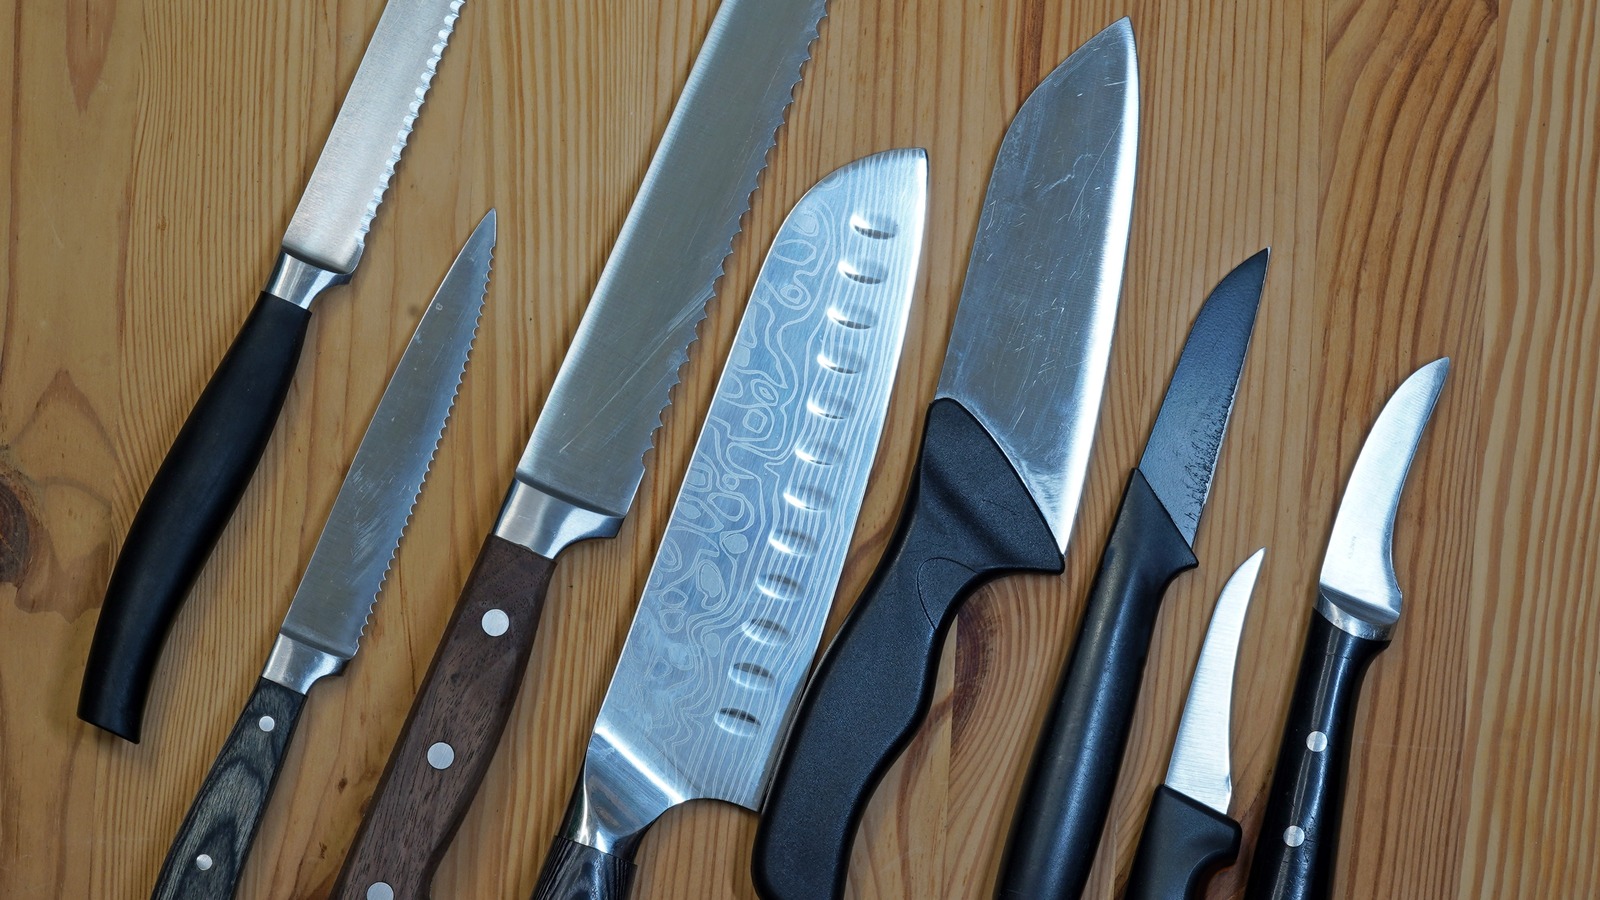 https://www.thedailymeal.com/img/gallery/8-celebrity-chef-brand-knives-that-are-actually-worth-buying/l-intro-1678372554.jpg